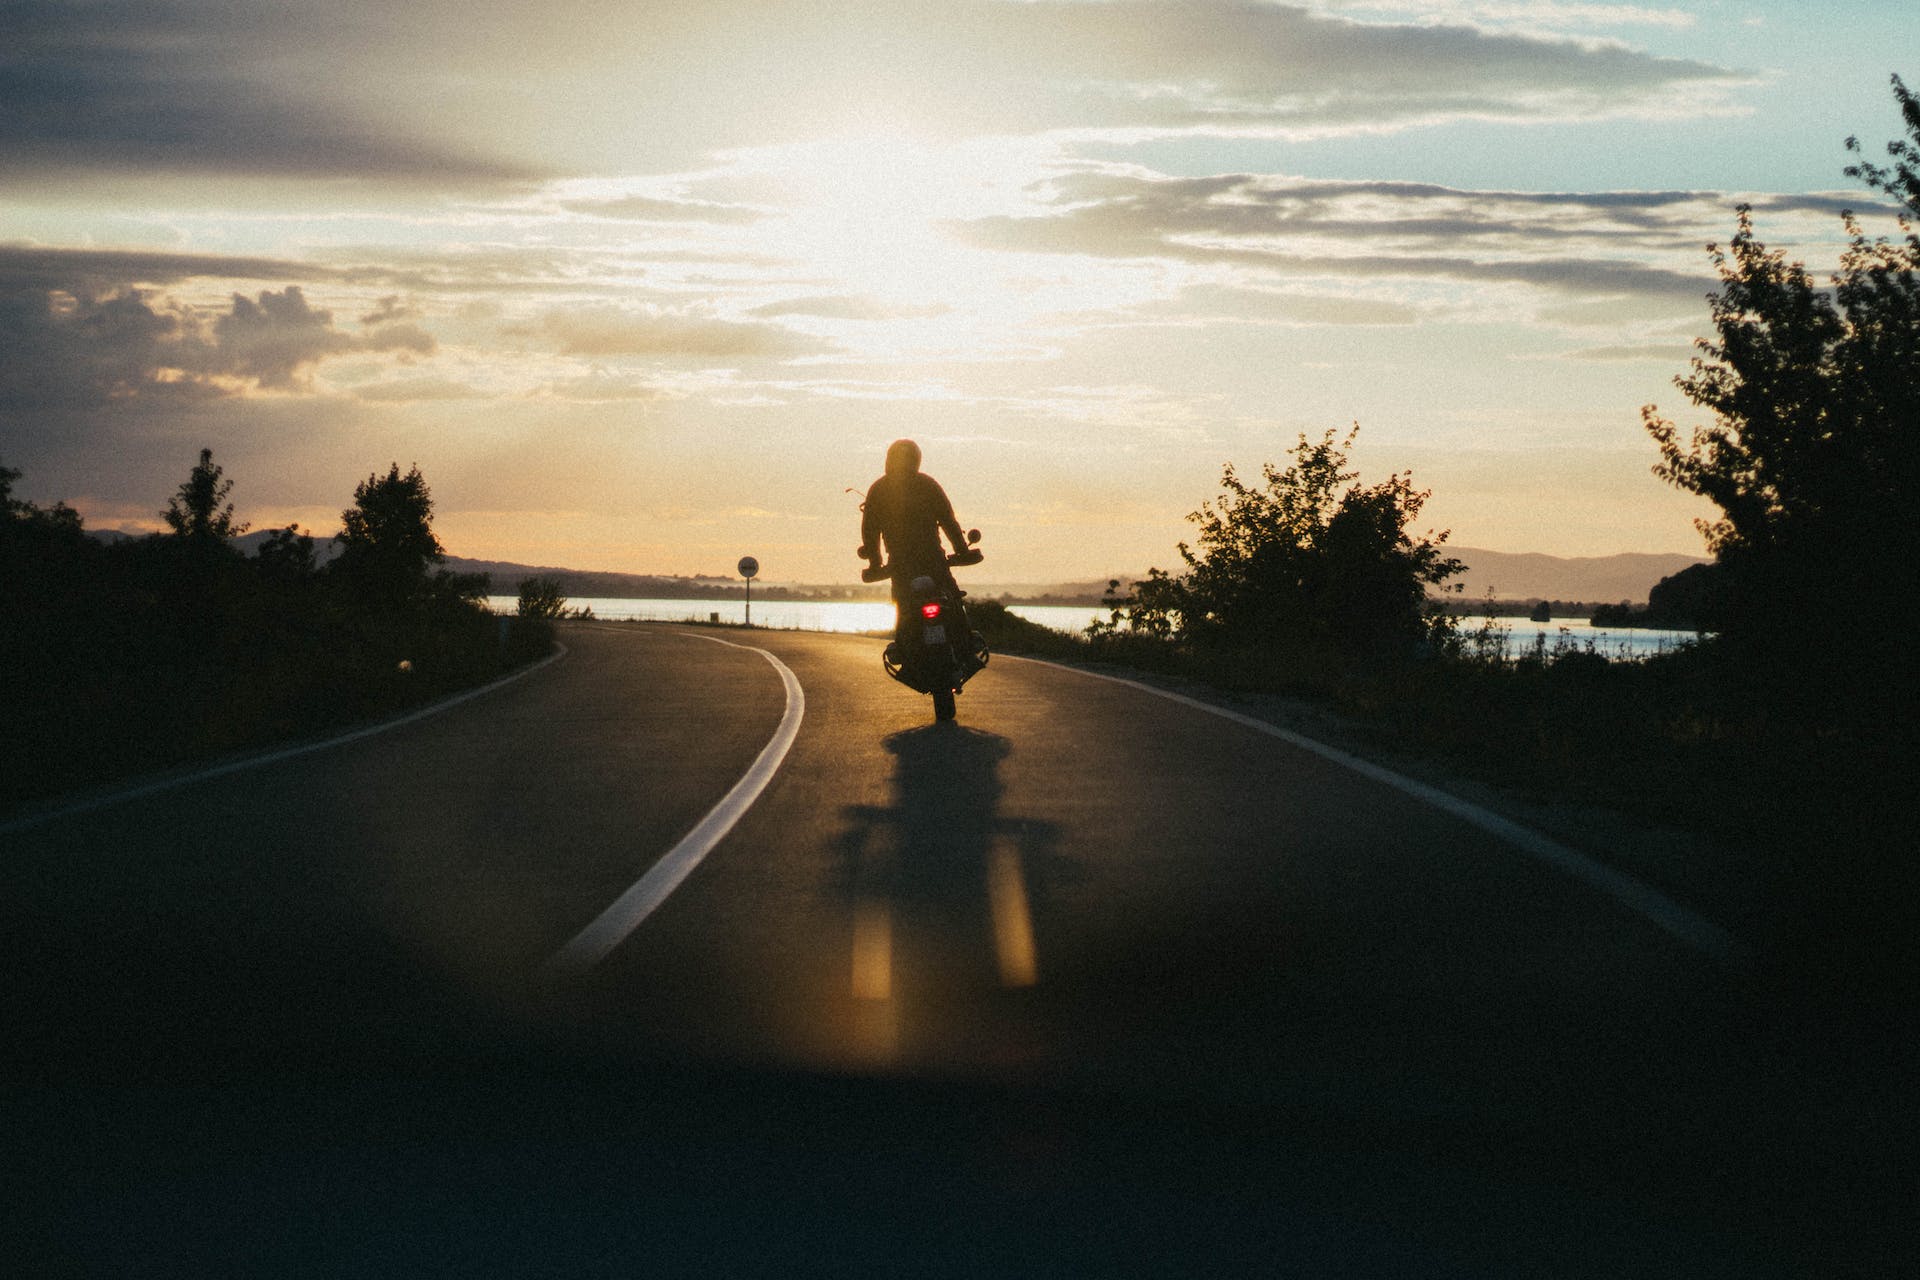 A person riding a motorcycle | Source: Pexels